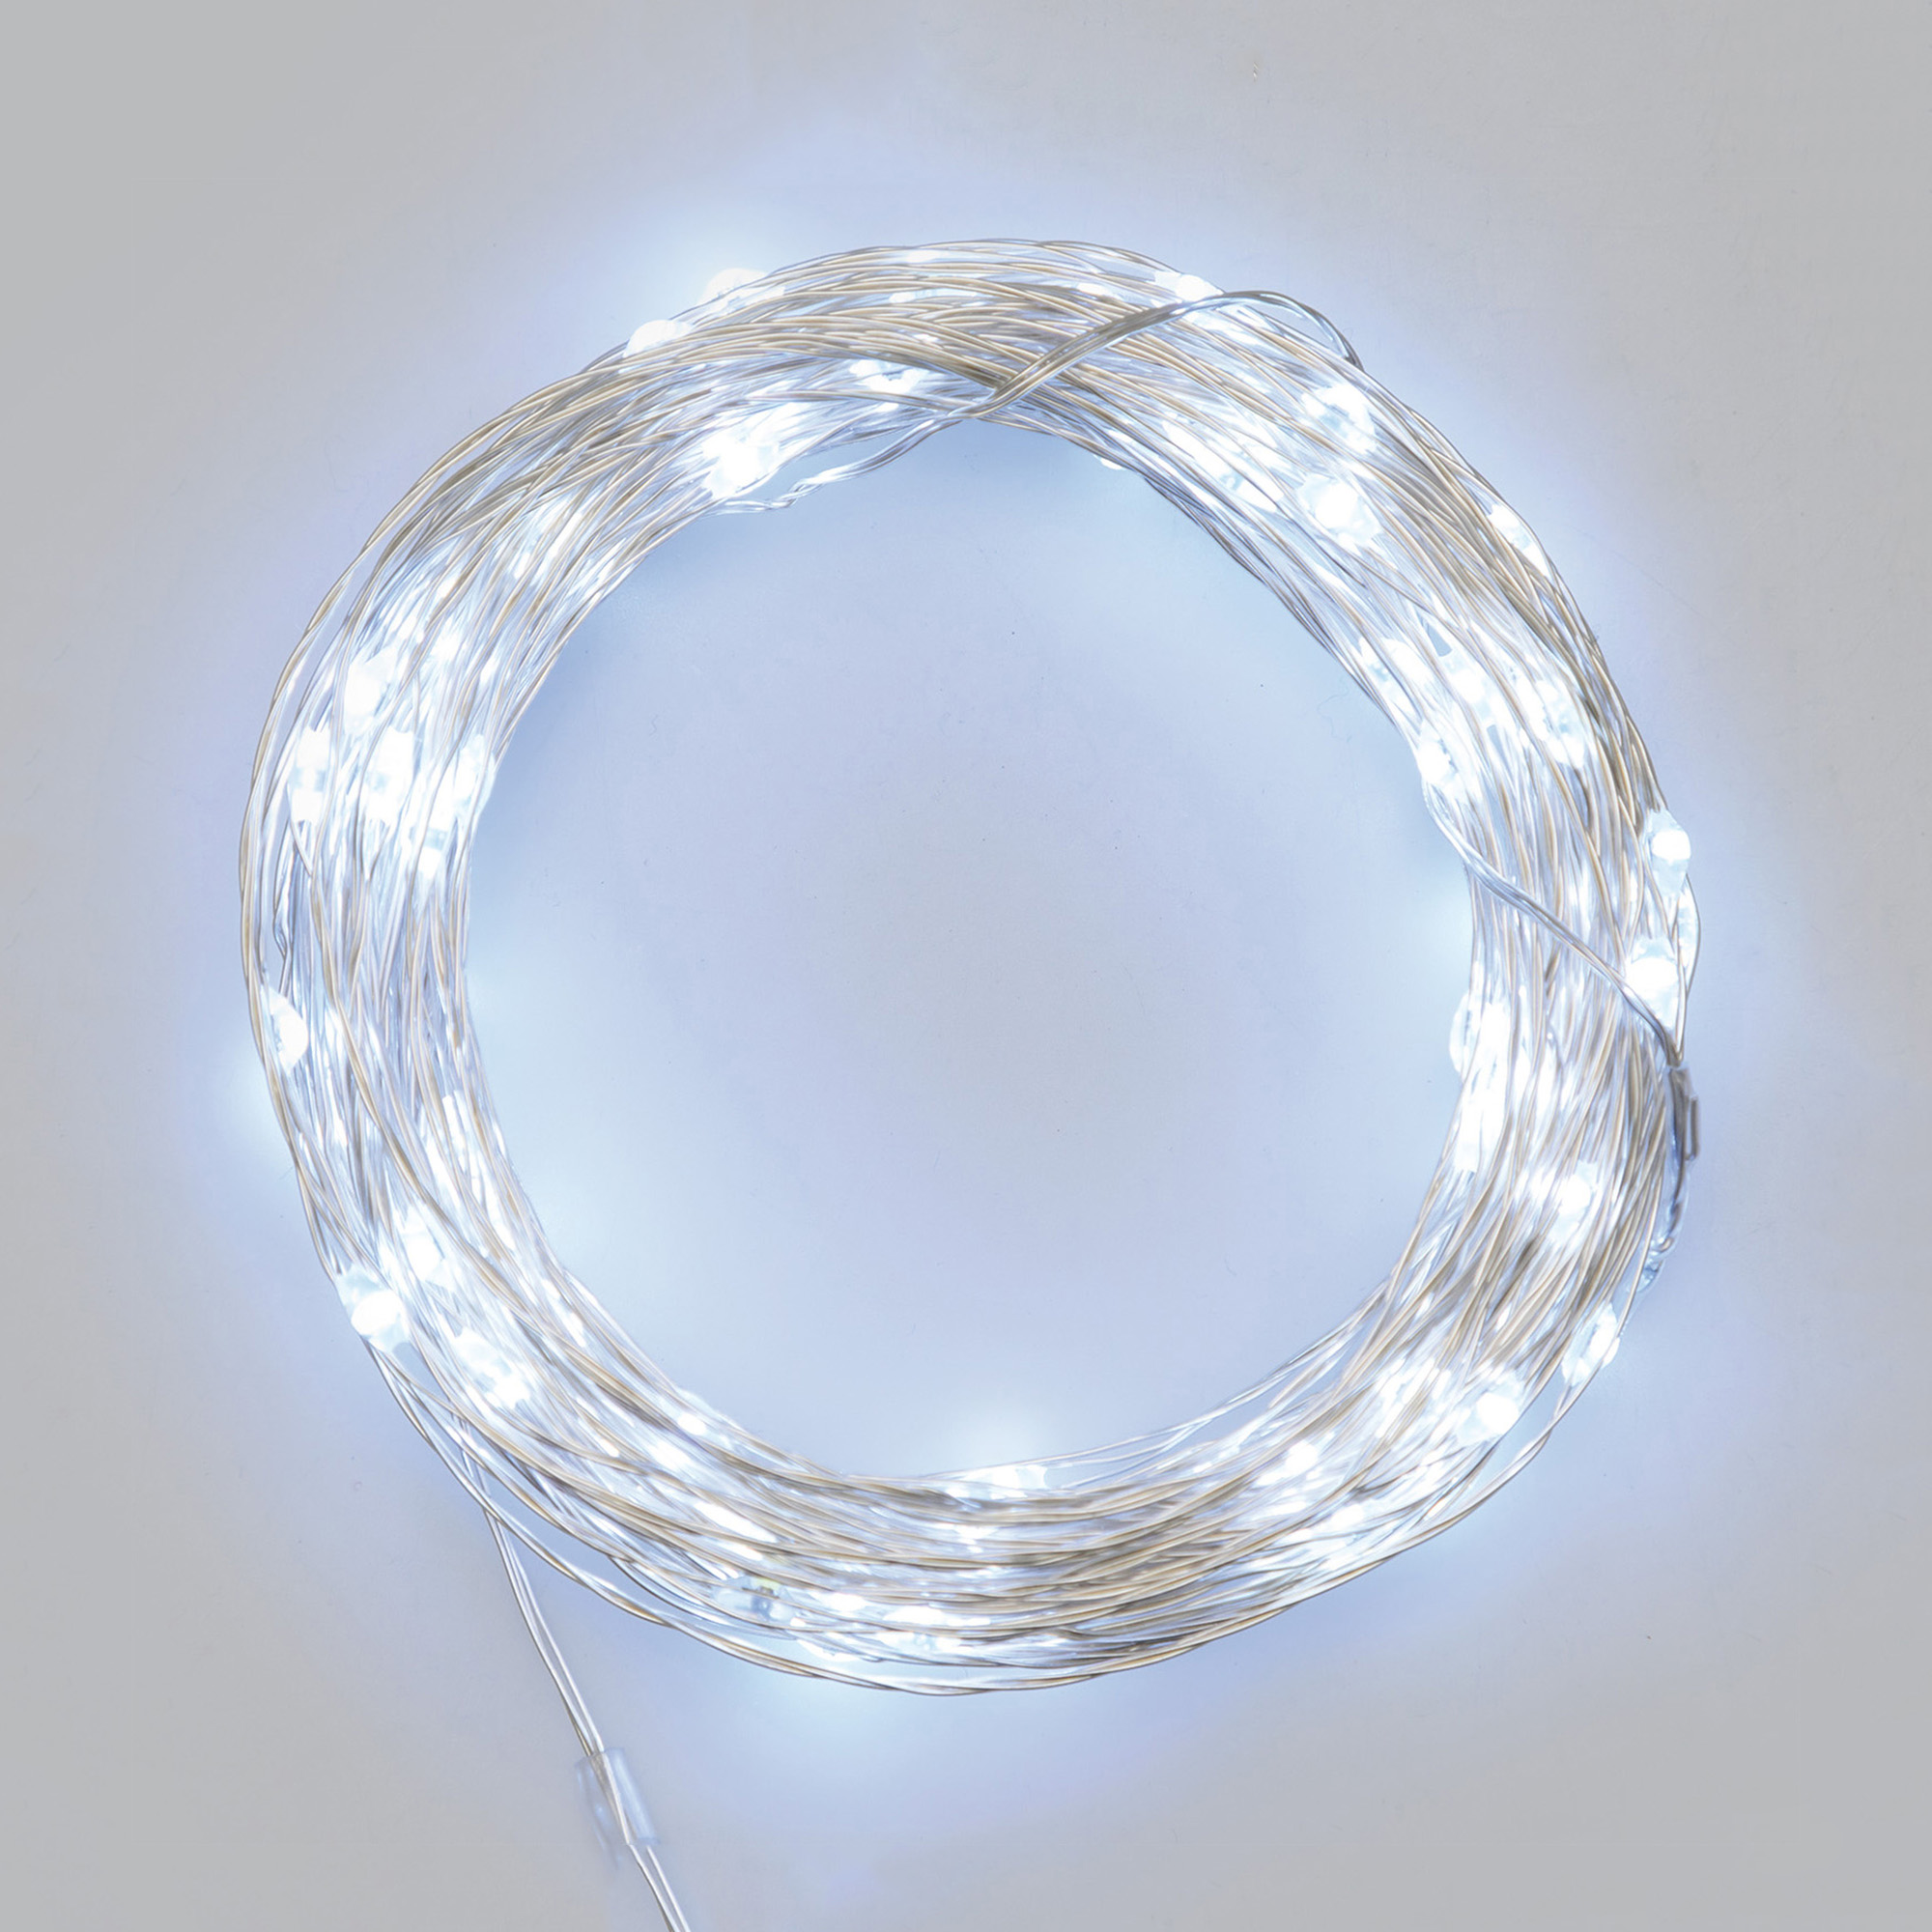 LED Micro Light Chain 100 cold white LEDs, Remote Control, 15 Functions, Battery Operated